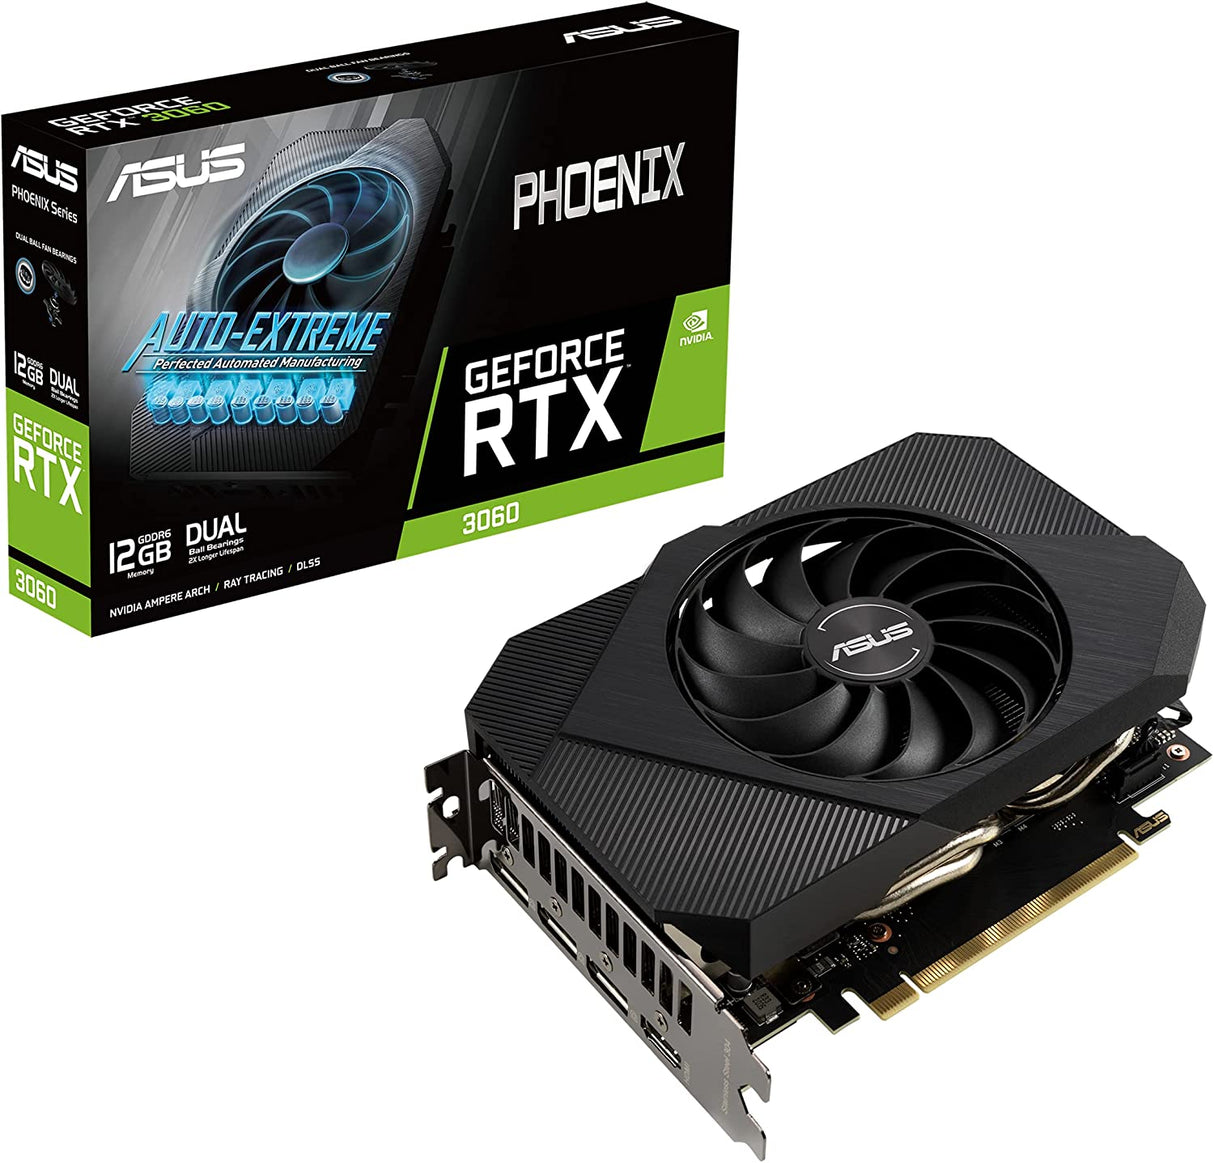 ASUS Phoenix NVIDIA GeForce RTX 3060 V2 Gaming Graphics Card- PCIe 4.0, 12GB GDDR6 memory, HDMI 2.1, DisplayPort 1.4a, Axial-tech Fan Design, Protective Backplate, Dual ball fan bearings, Auto-Extreme Graphic Card